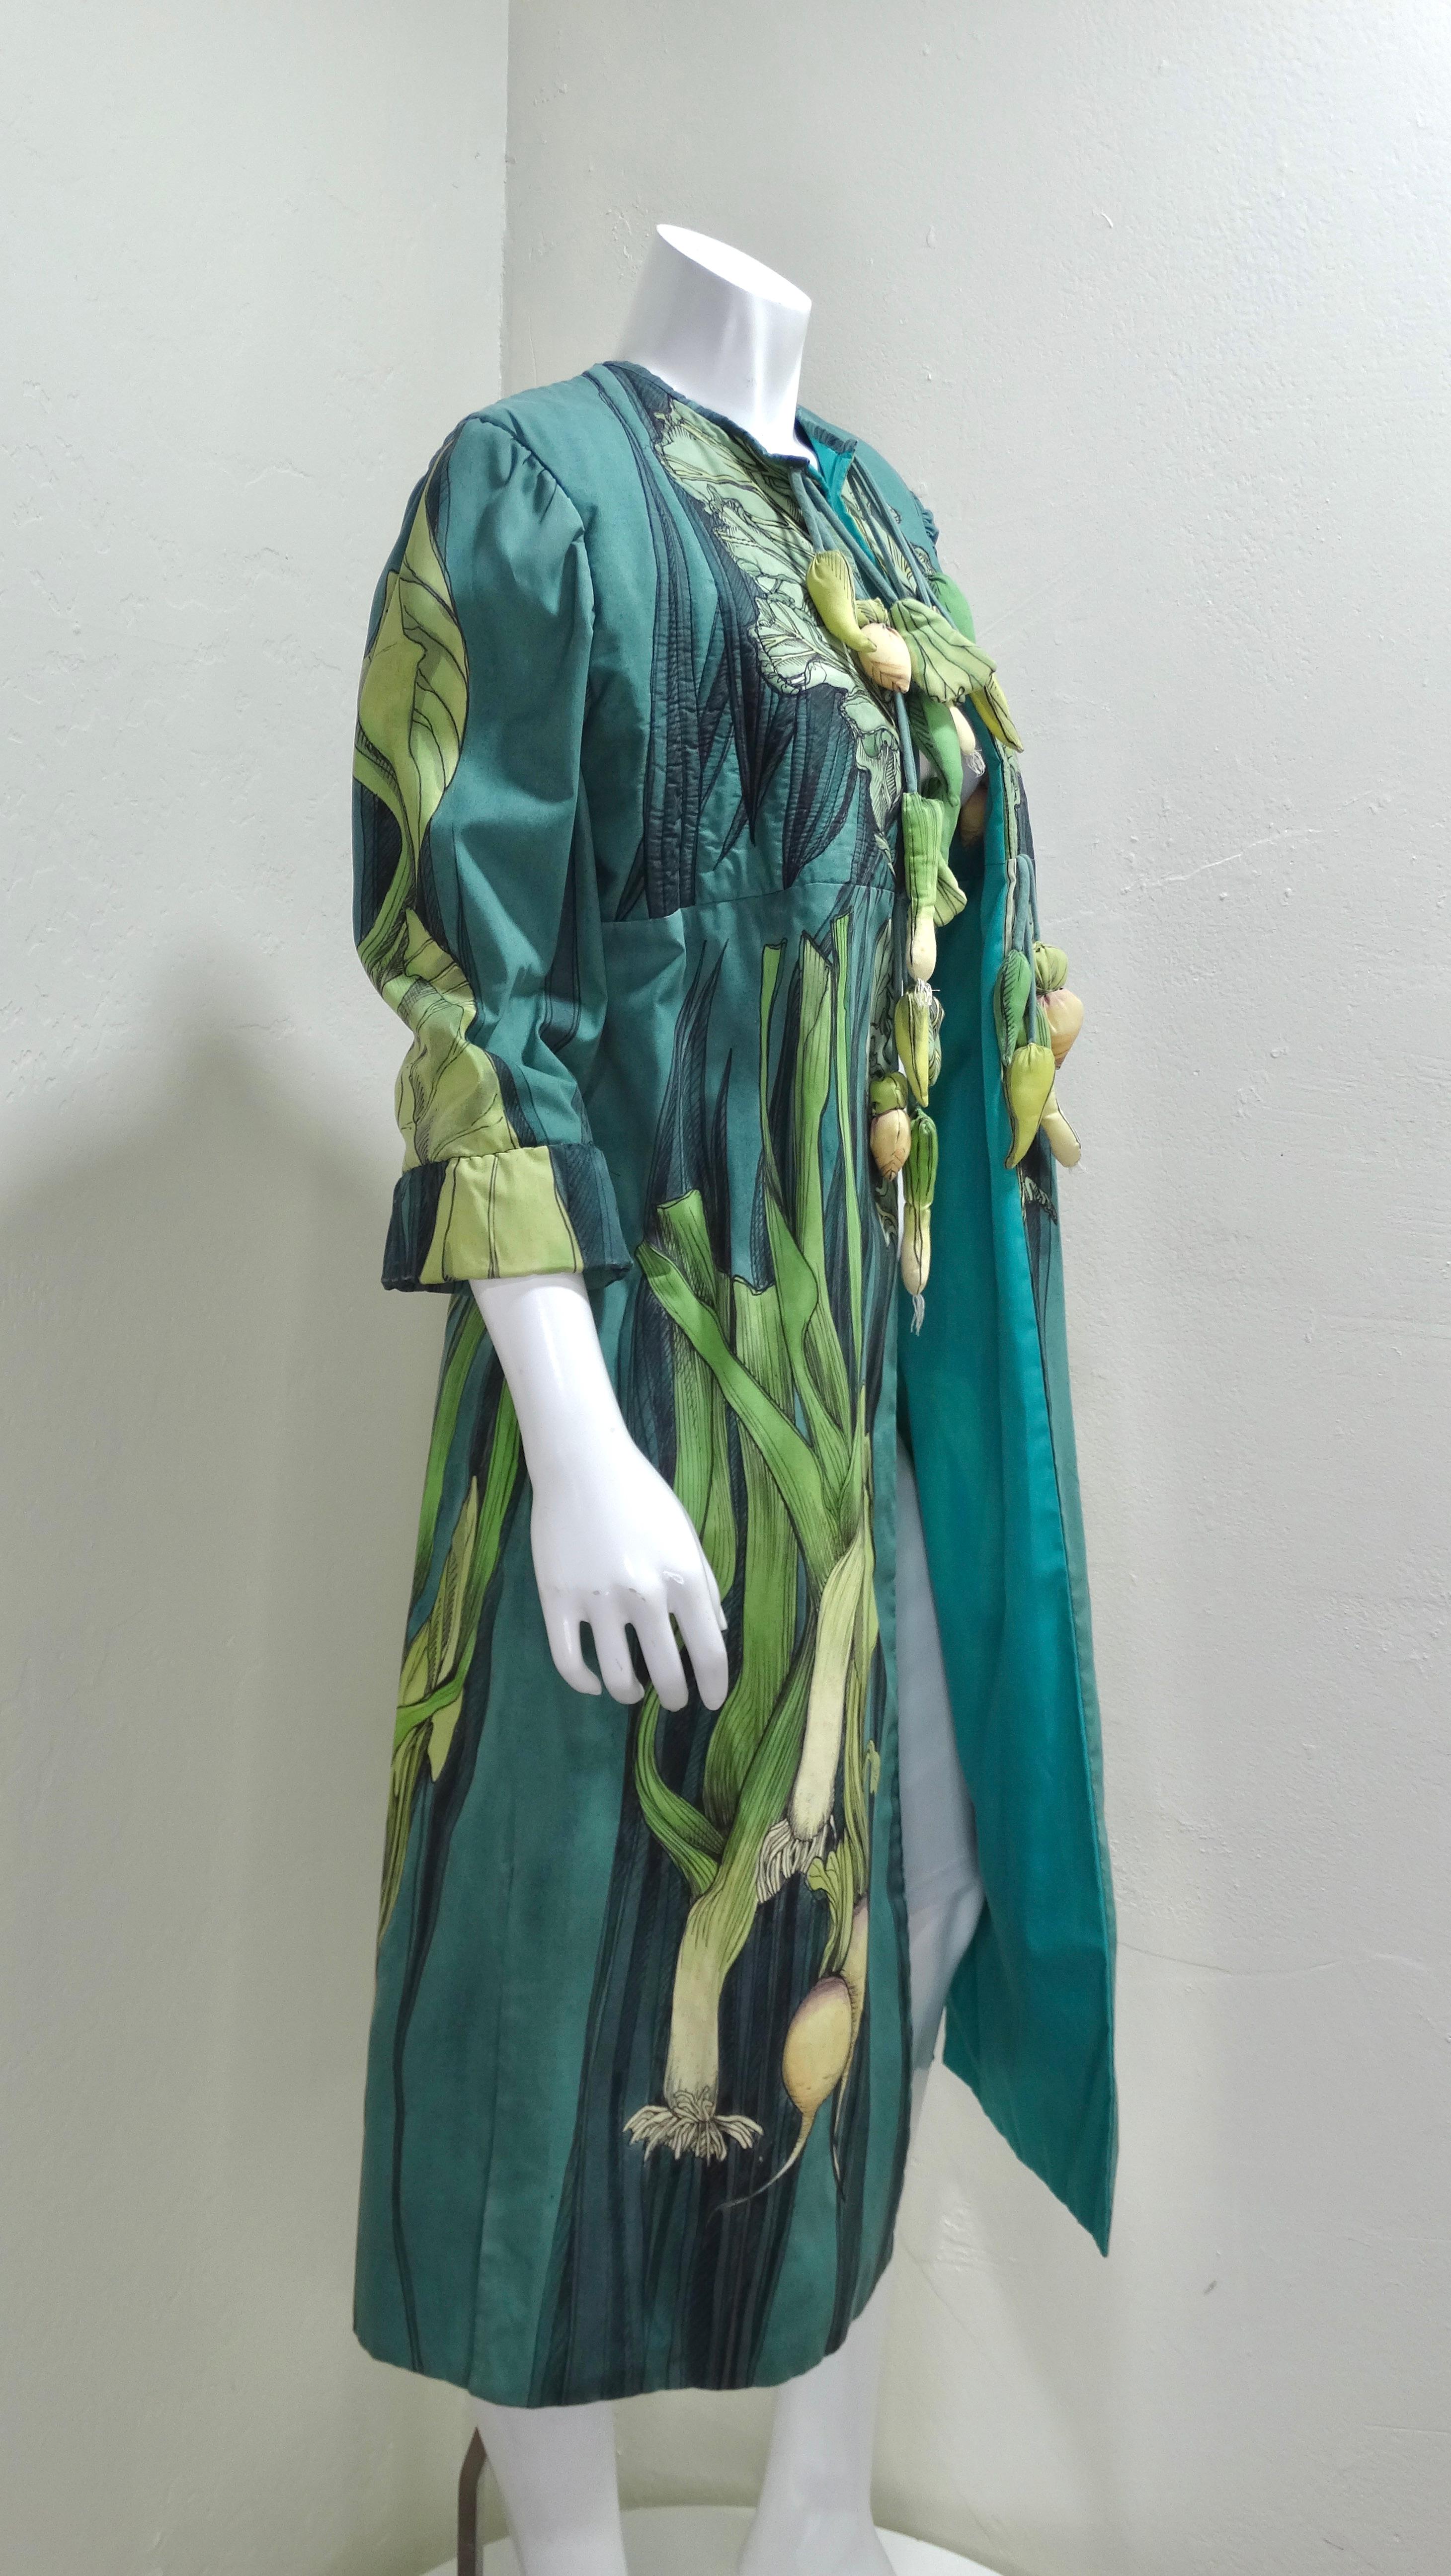 Sara Drower Vegetable Motif Embroidered Duster In Excellent Condition For Sale In Scottsdale, AZ